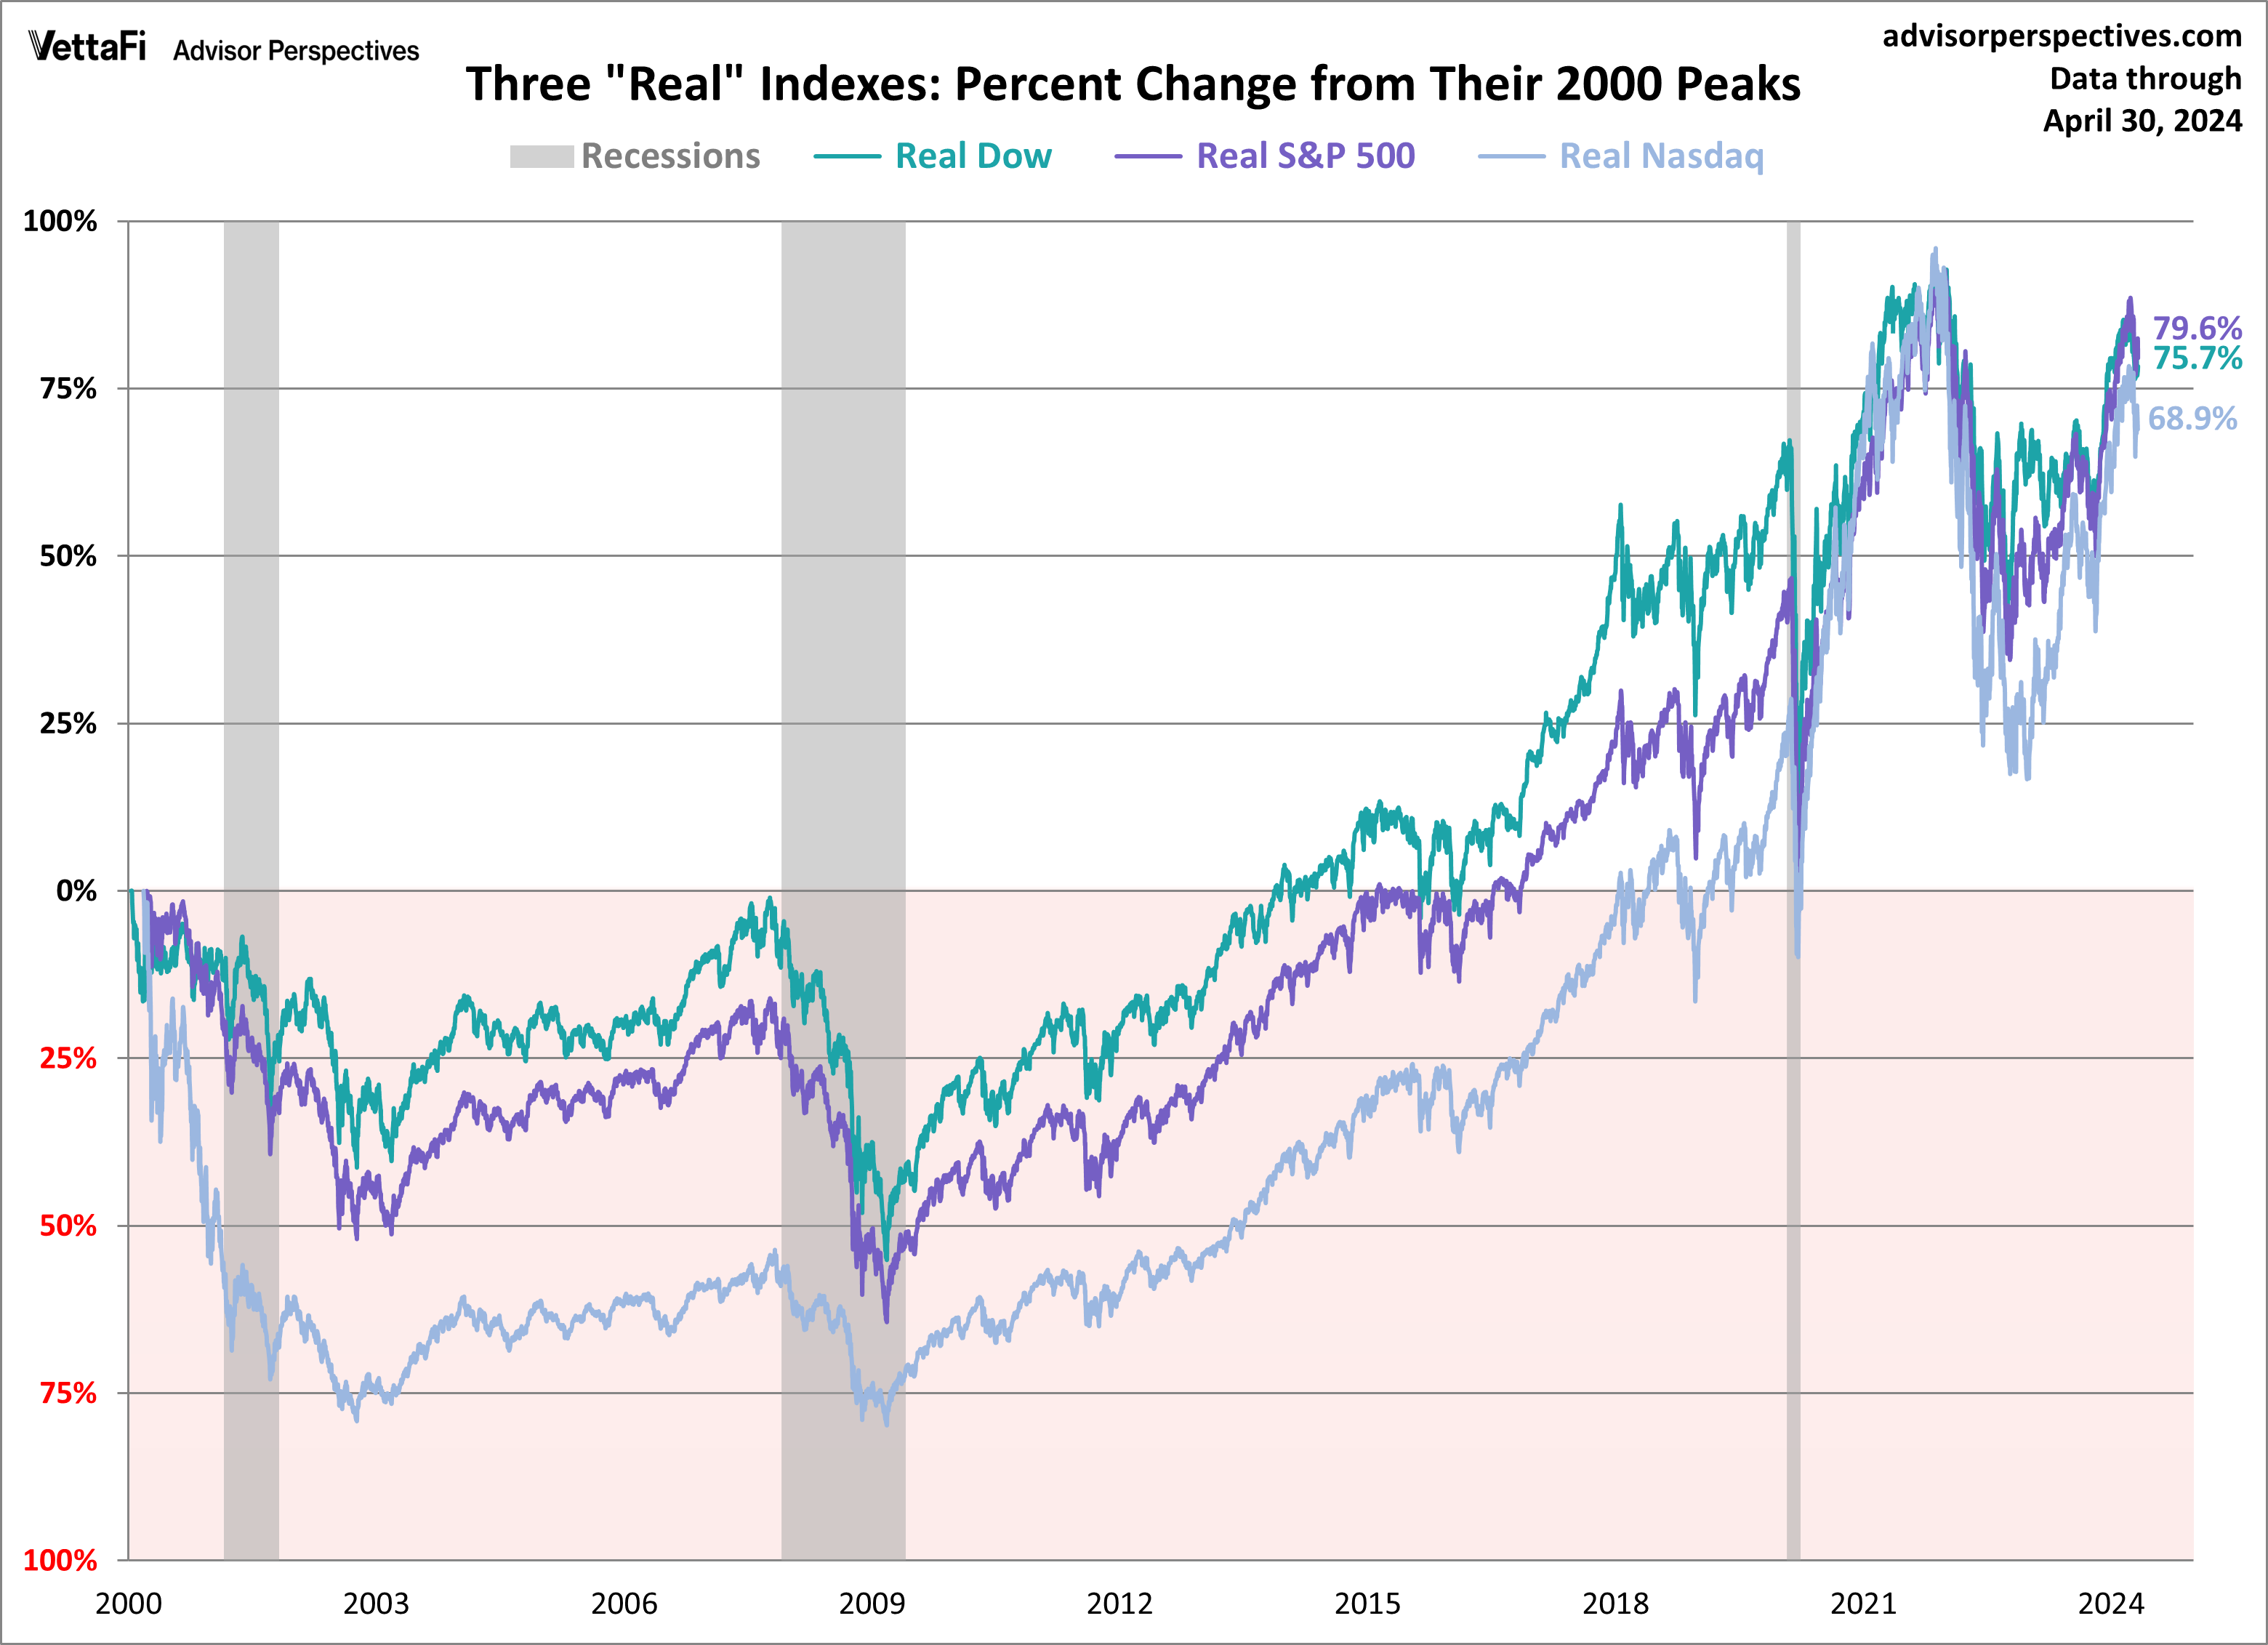 3 Real Indexes_Percent Change from 2000 Peaks